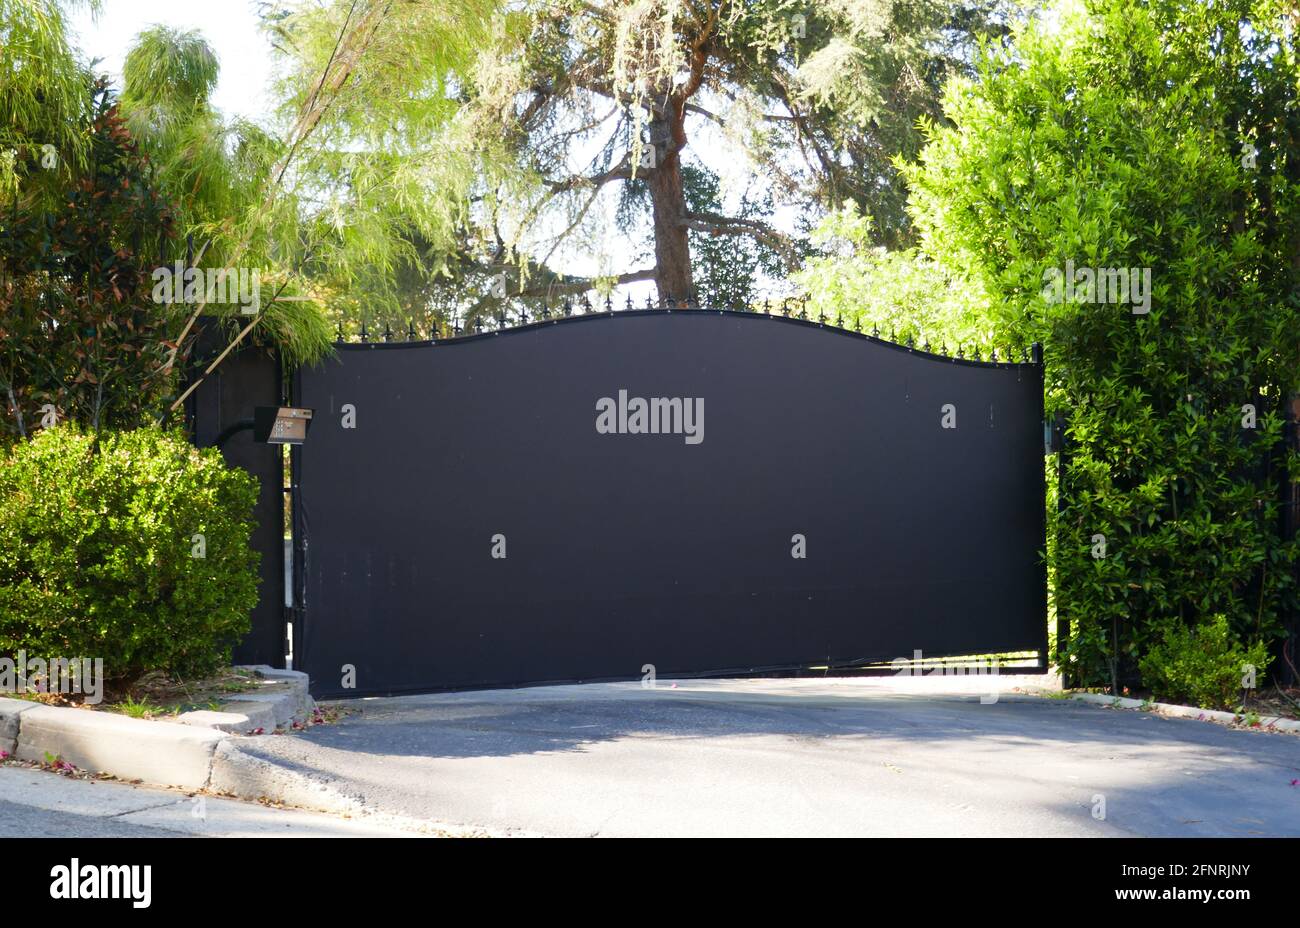 Los Angeles, California, USA 18th May 2021 A general view of atmosphere of actor Jay Acovone's former home/house at 3811 Multiview Drive in Los Angeles, California, USA. Photo by Barry King/Alamy Stock Photo Stock Photo